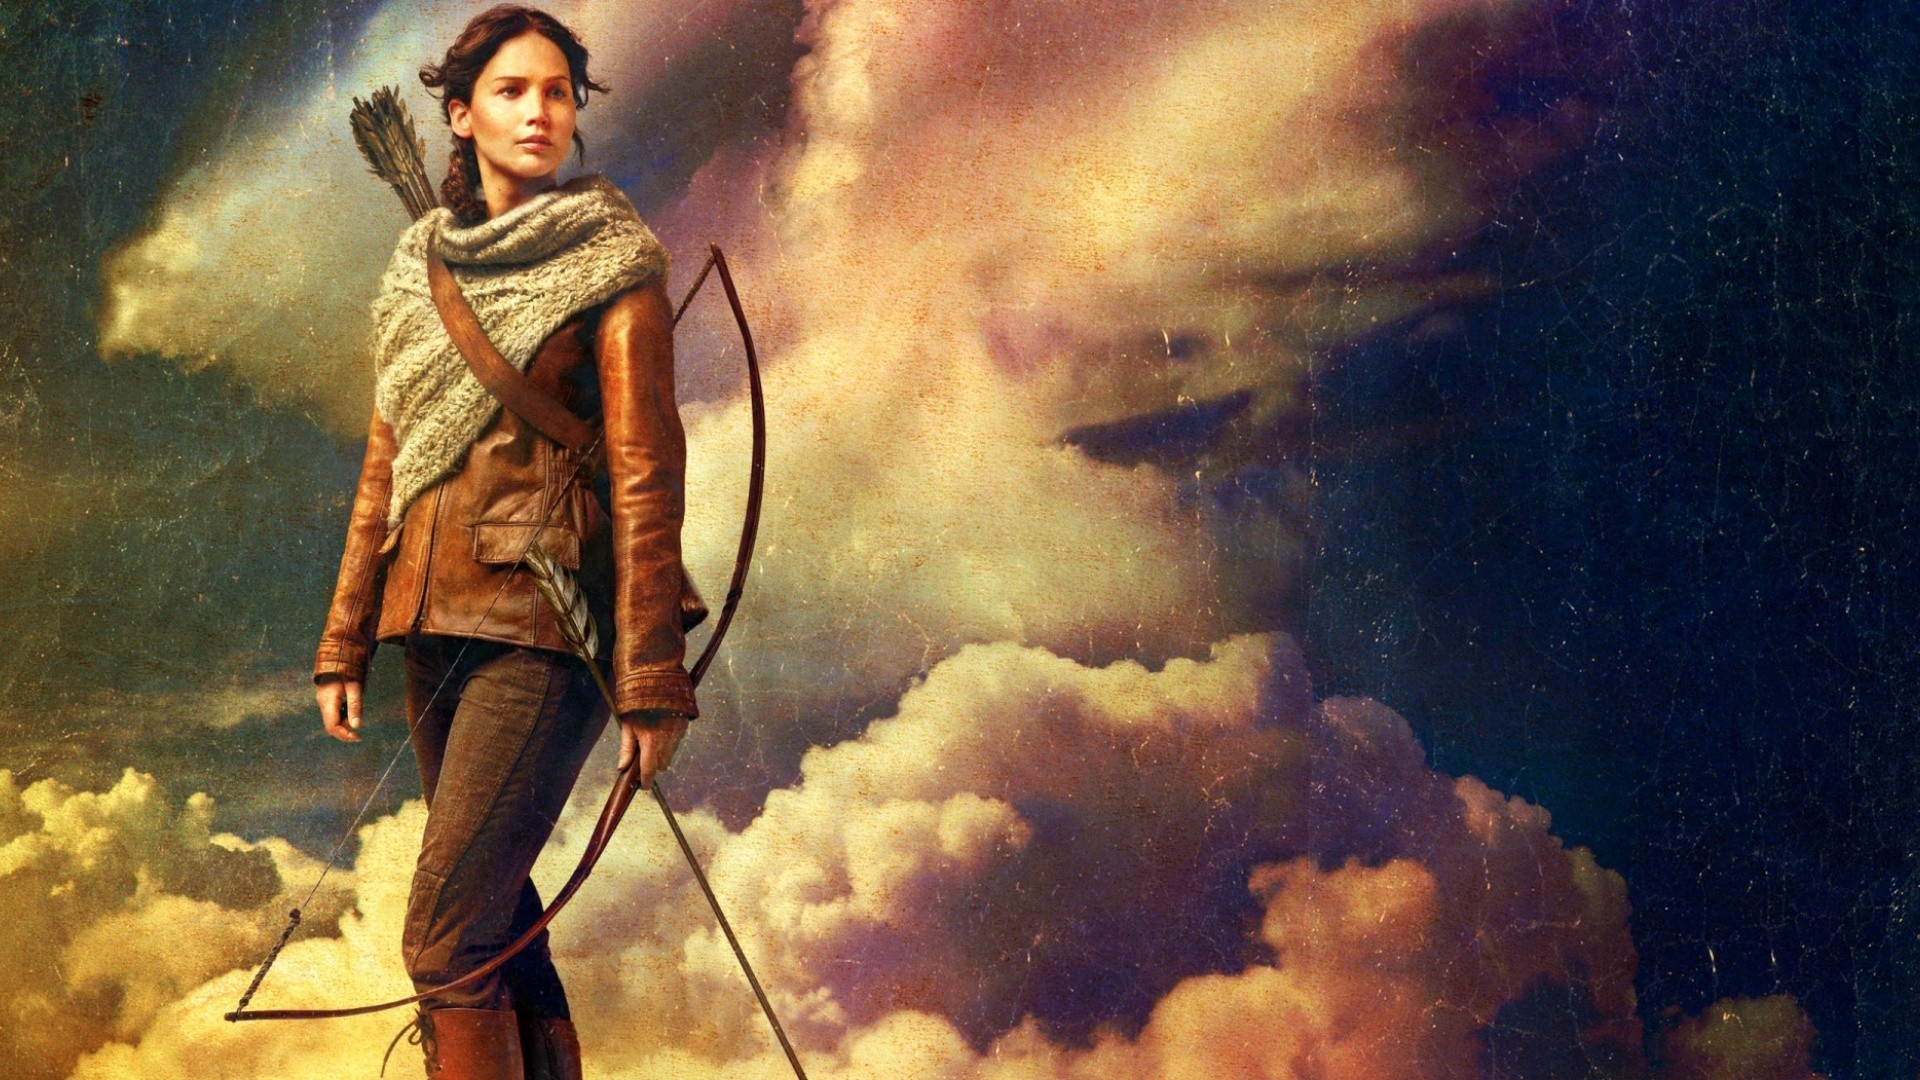 People 1920x1080 The Hunger Games movies Jennifer Lawrence women Katniss Everdeen bow standing sky clouds American women